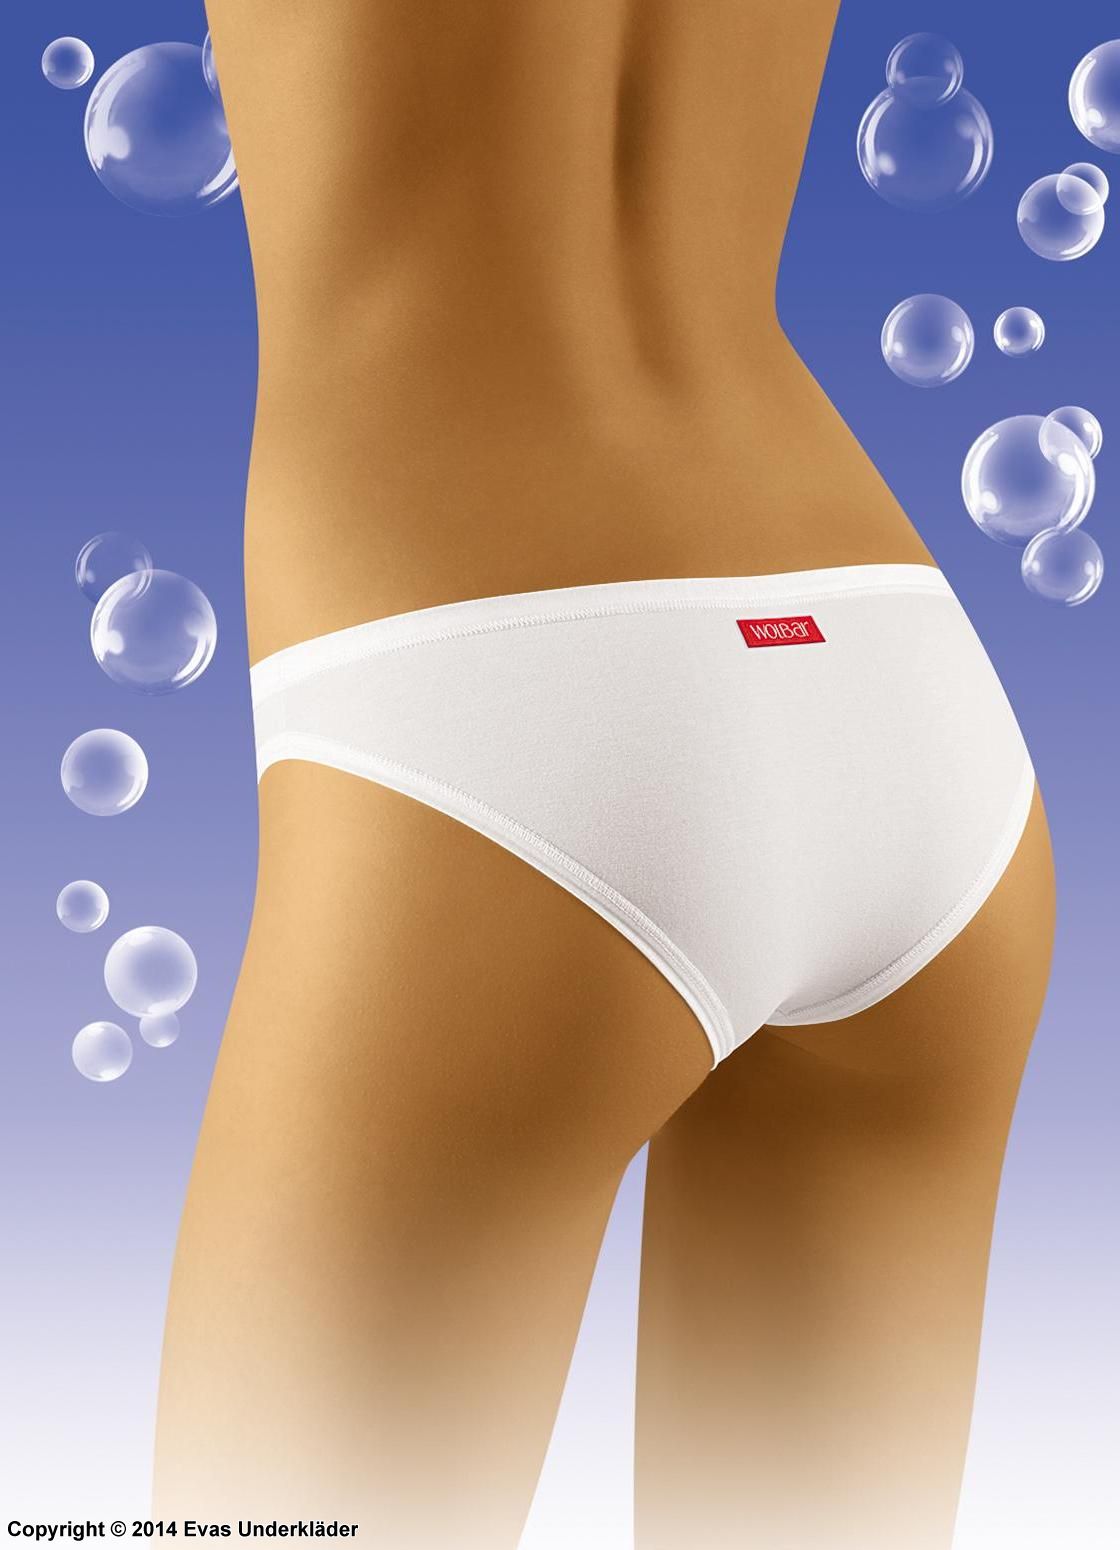 Classic briefs, high quality cotton, without pattern